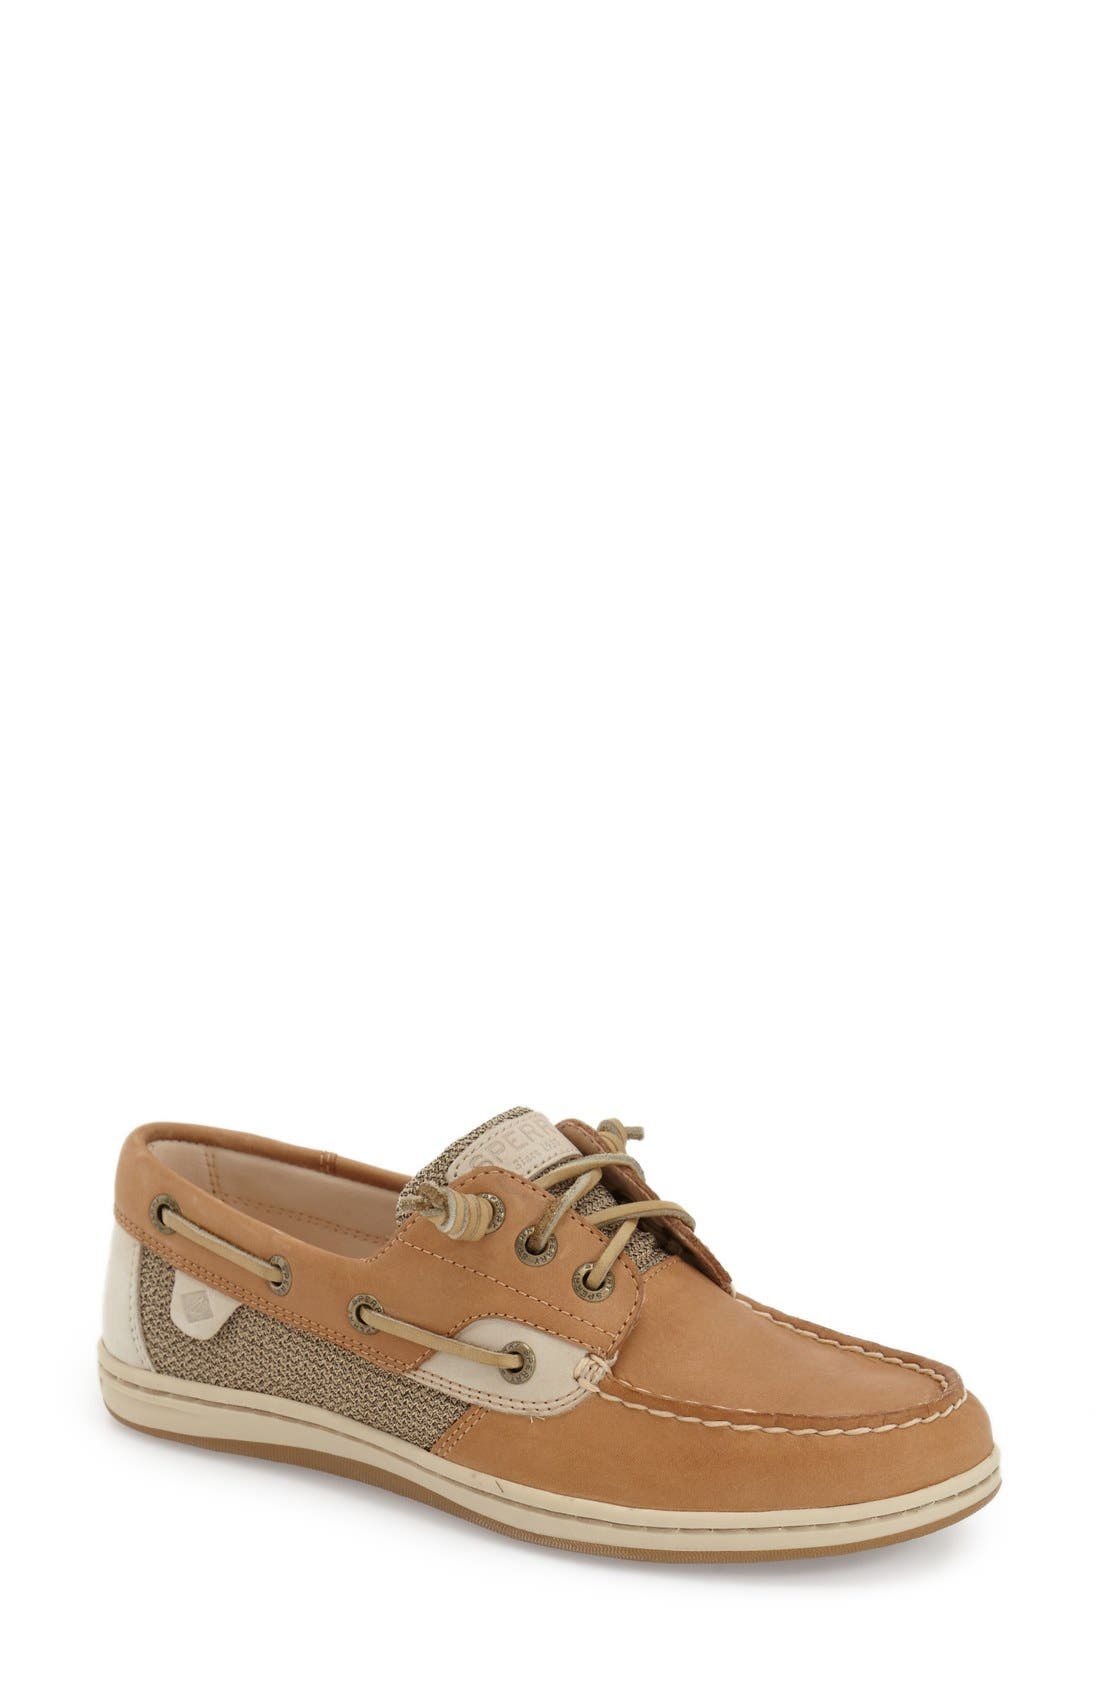 sperry boat shoes nordstrom